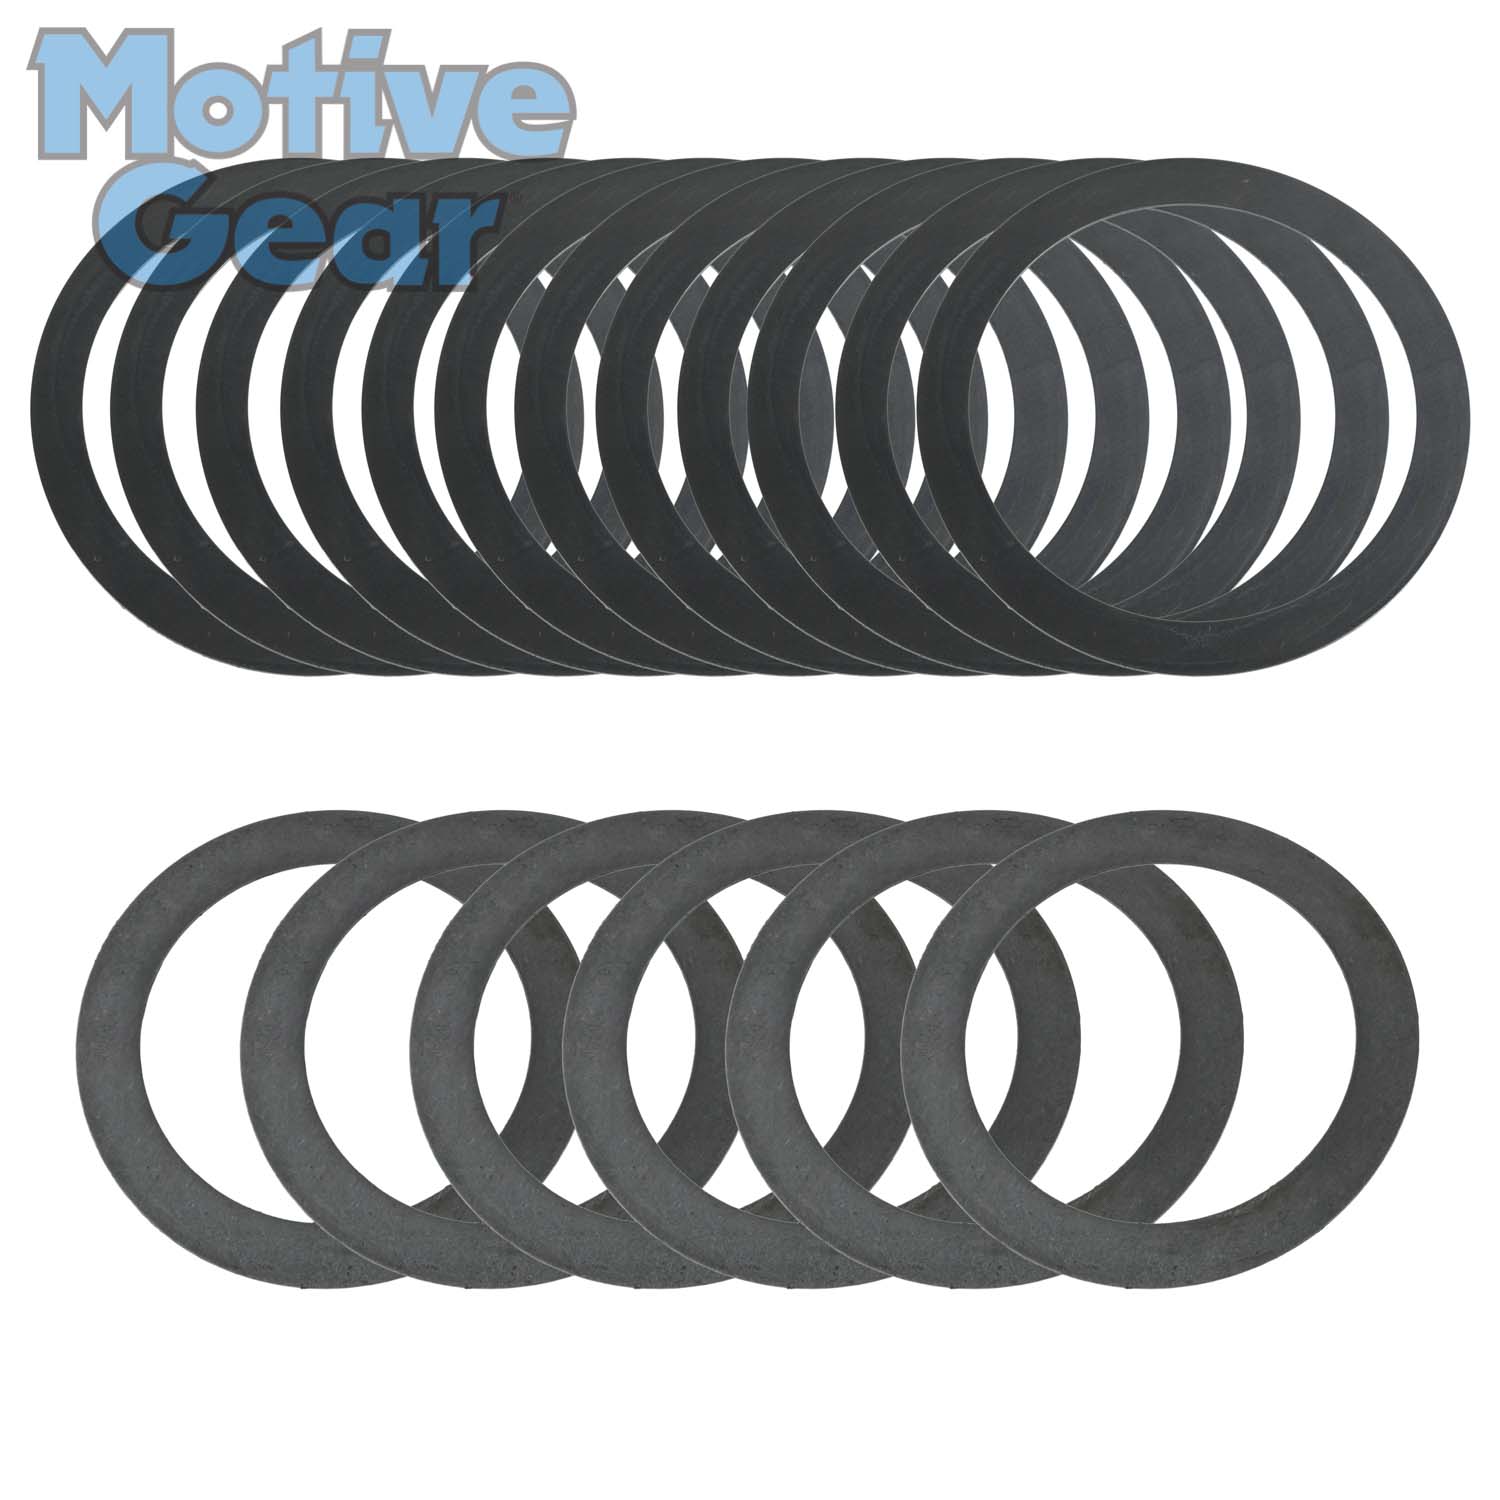 Show details for Motive Gear Carrier And Pinion Shim Kit